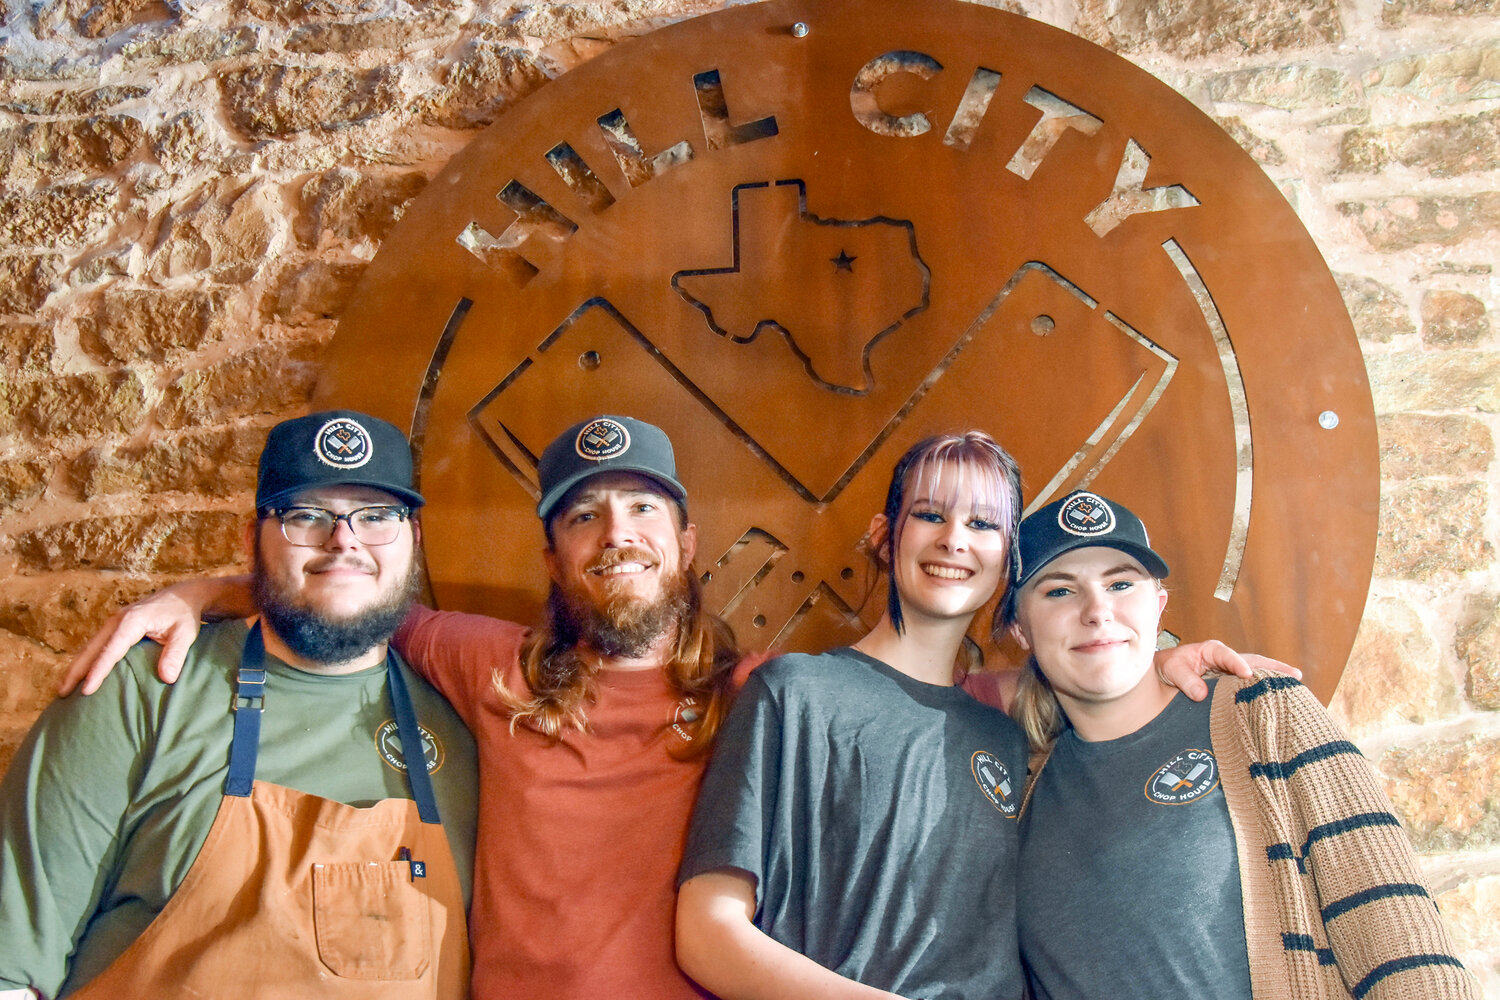 The Hill City Chop House crew includes, from left, Jack Allison, owner Dustin Martin, Cadence Lewis, and Mara Hall. The Tolar restaurant is open Thursday-Sunday and sometimes offers live music.